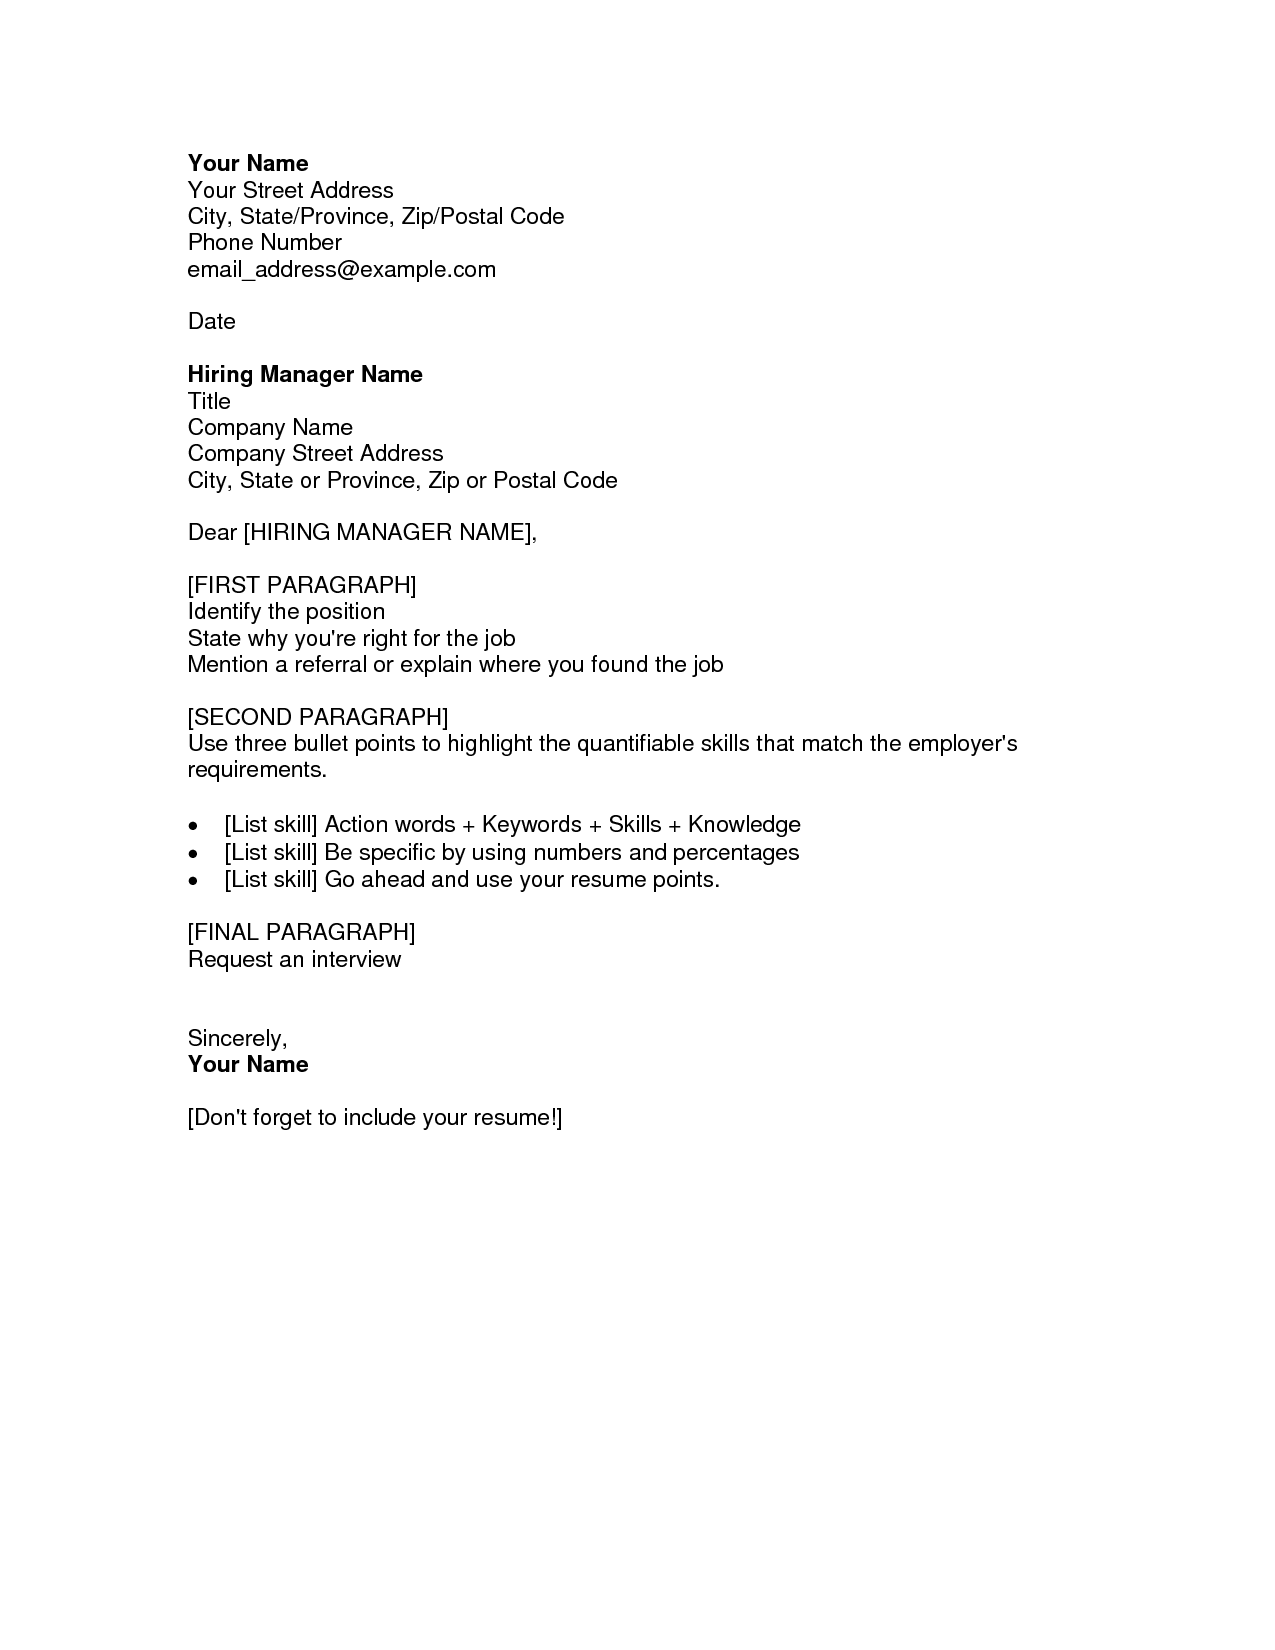 resume cover letter rich image and wallpaper